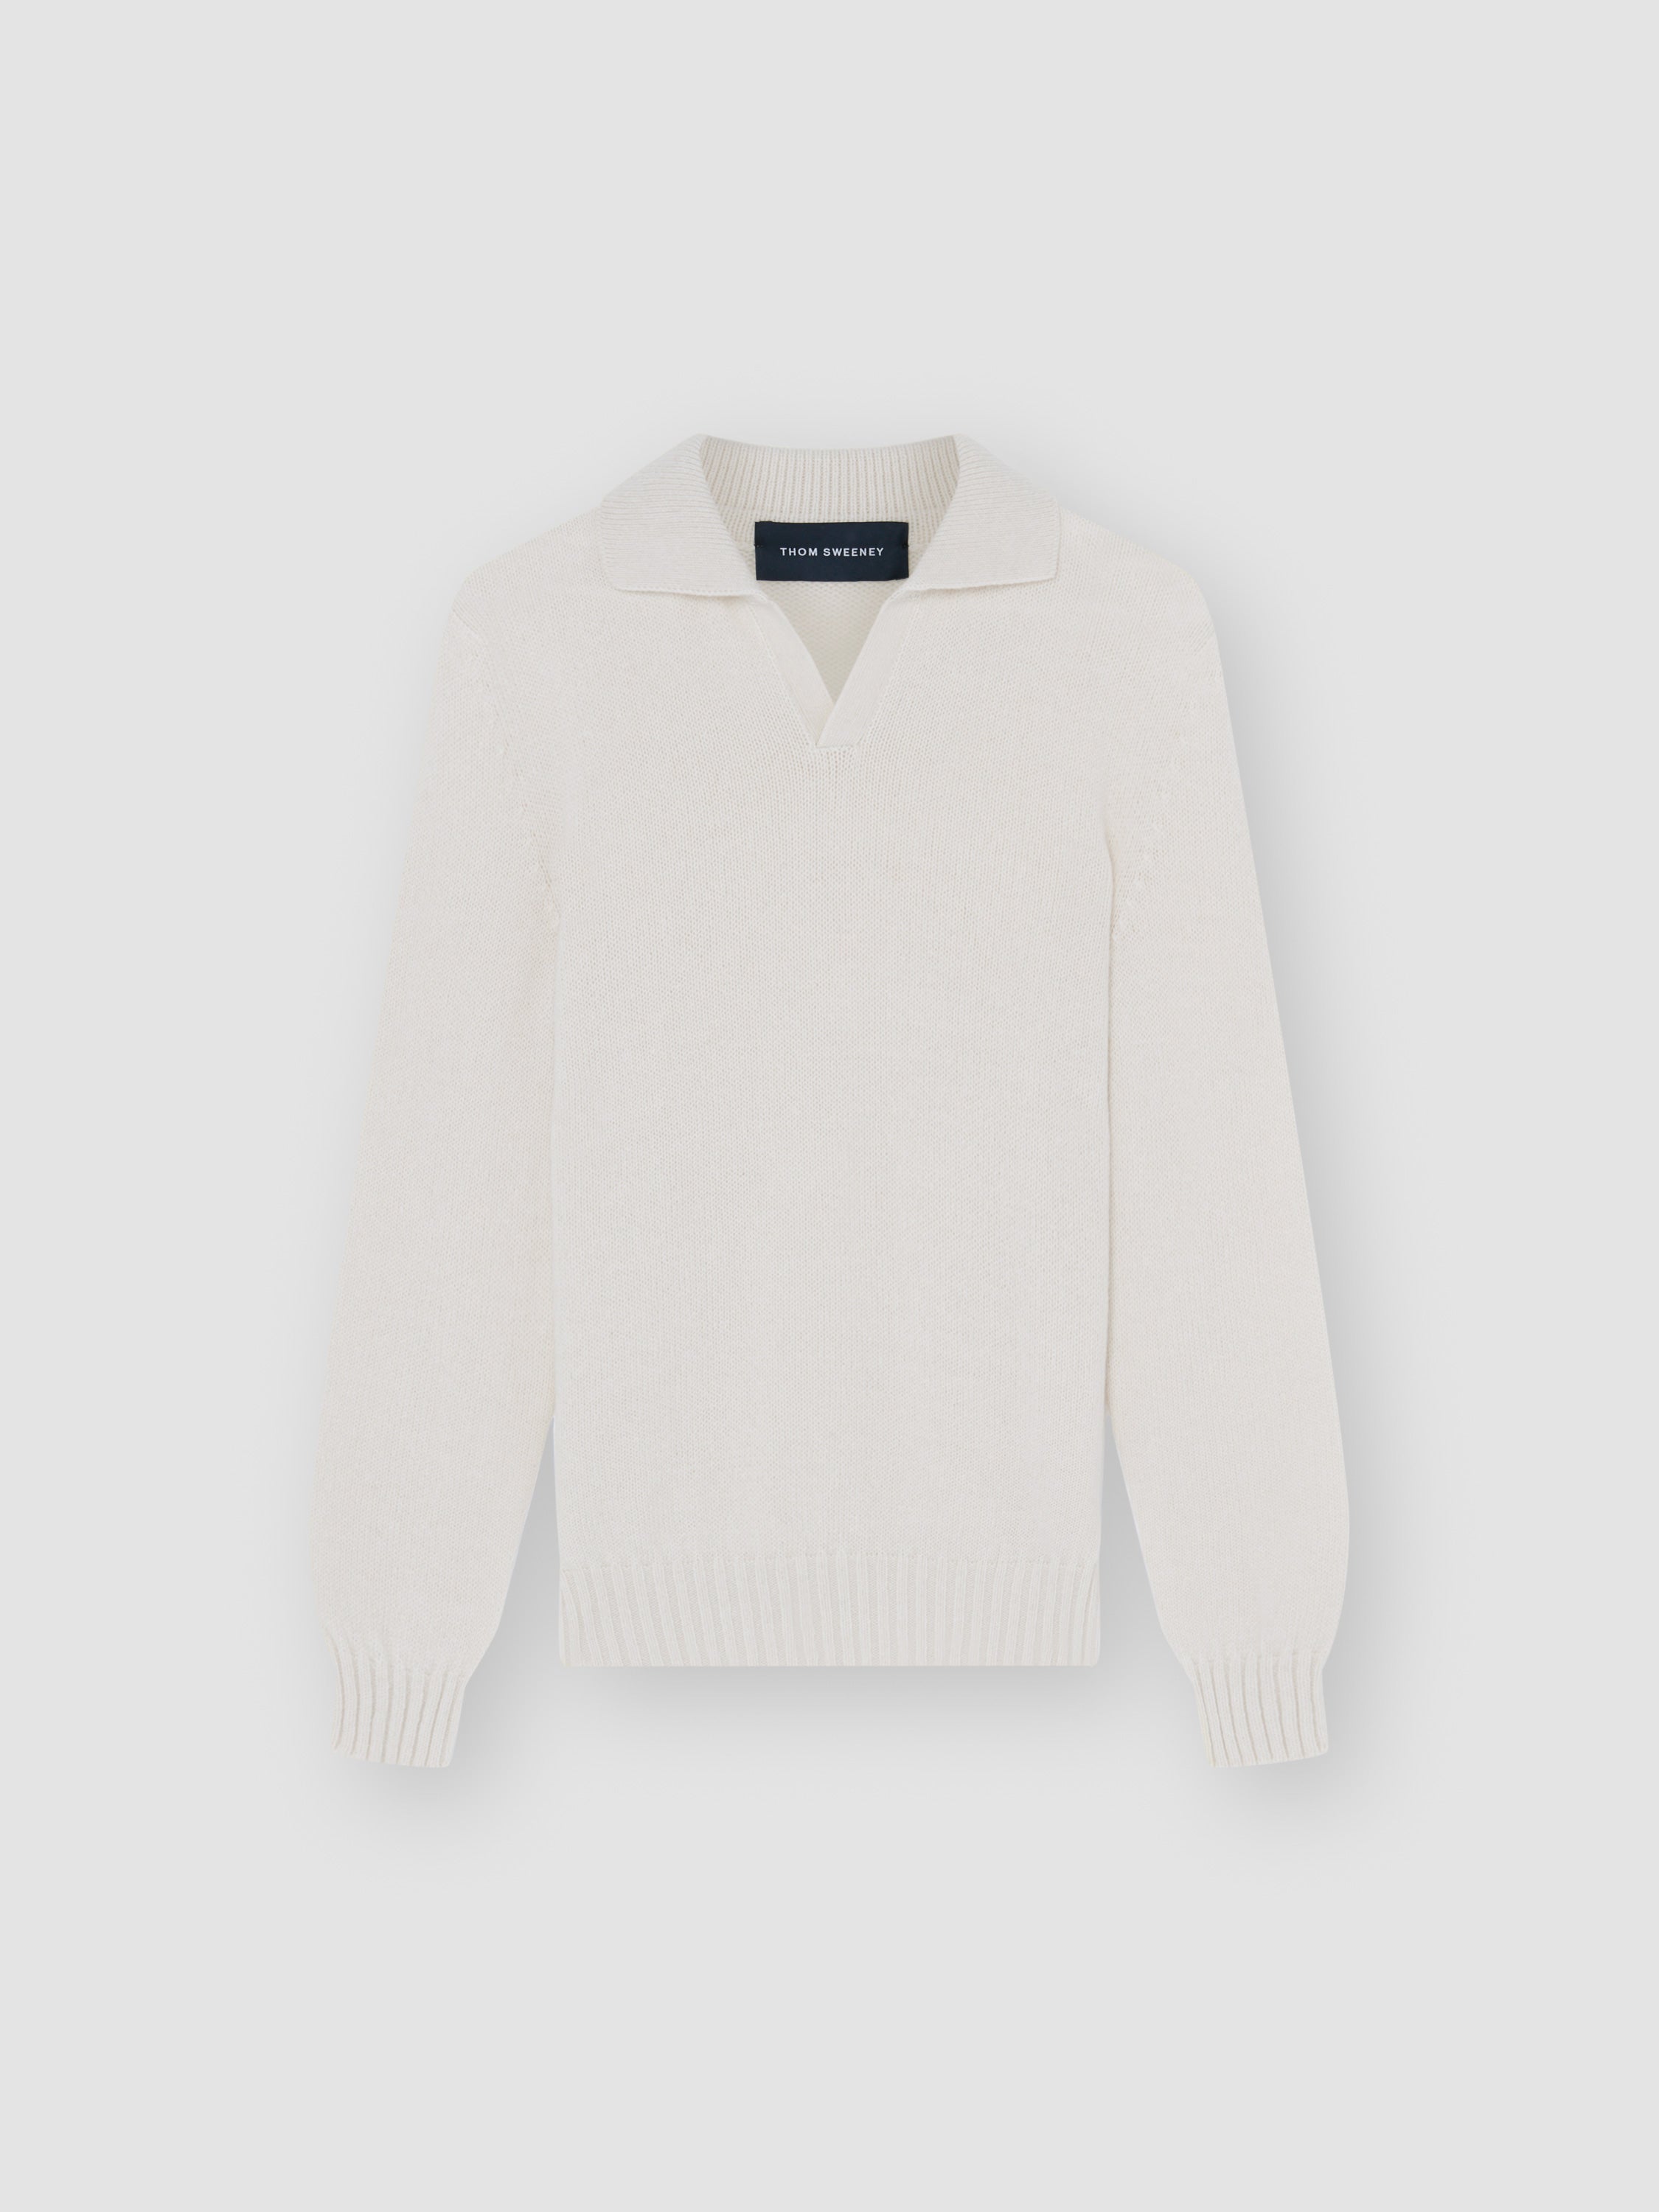 Cashmere Long Sleeve Skipper Polo Shirt Off White Product Image